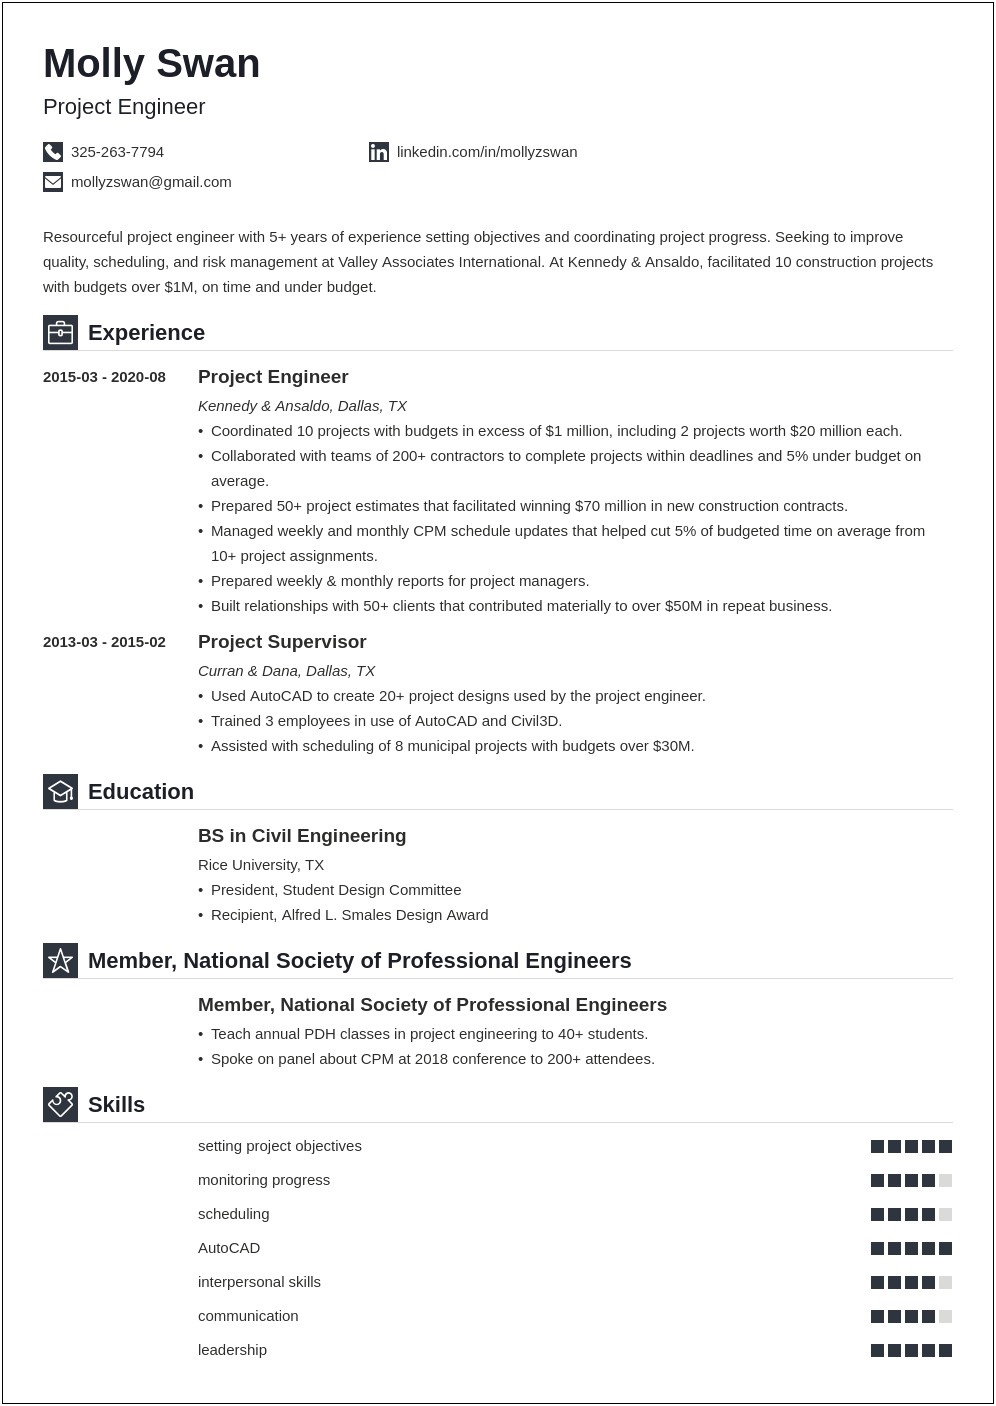 Resume Of A Projec Manager And Senior Engineer